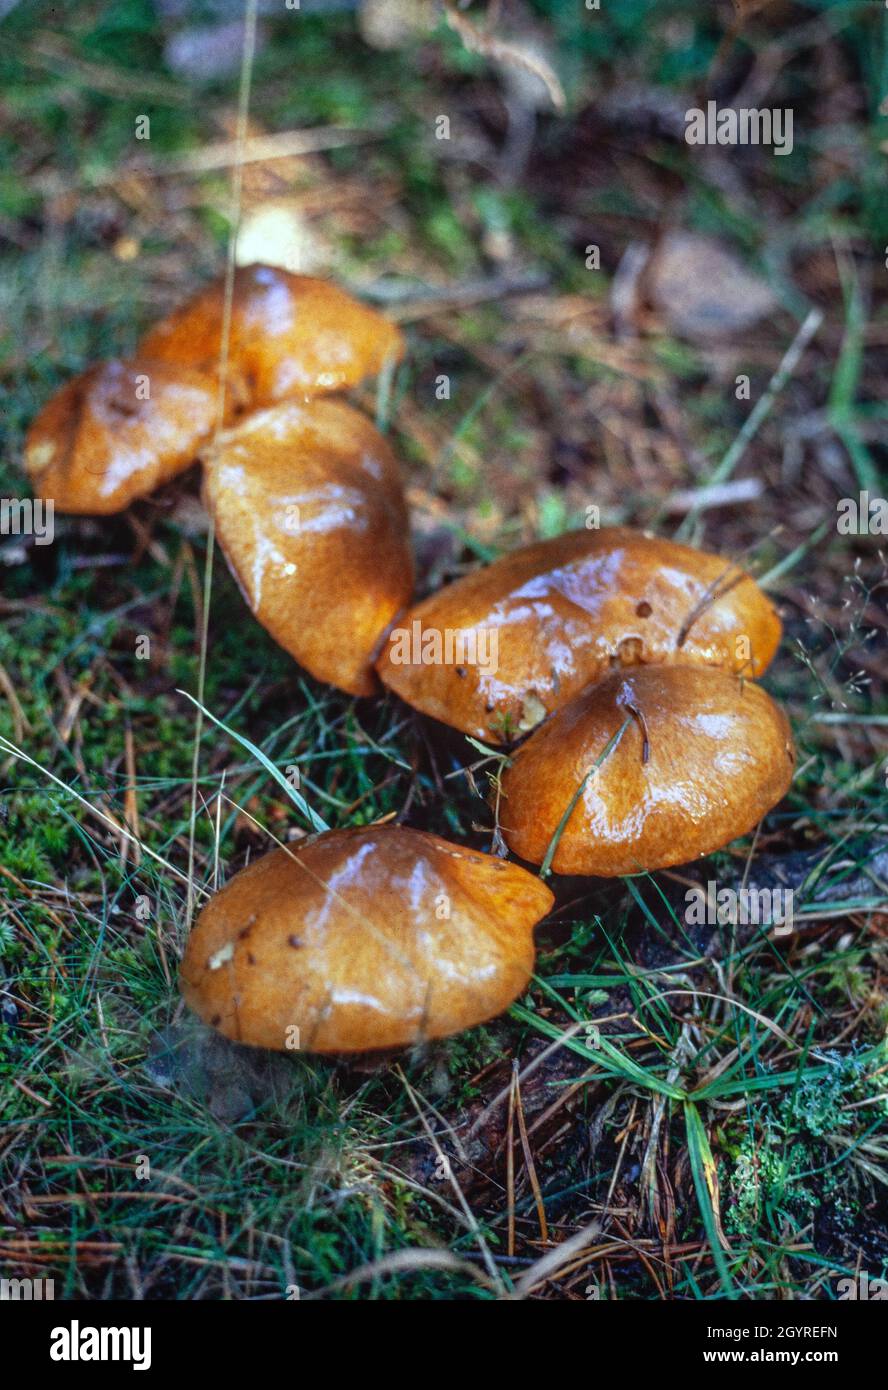 Golden Orange Tricholoma (Tricholoma aurantium), Hudge thrust after the rain in a forest of malmkoping, sweden Stock Photo